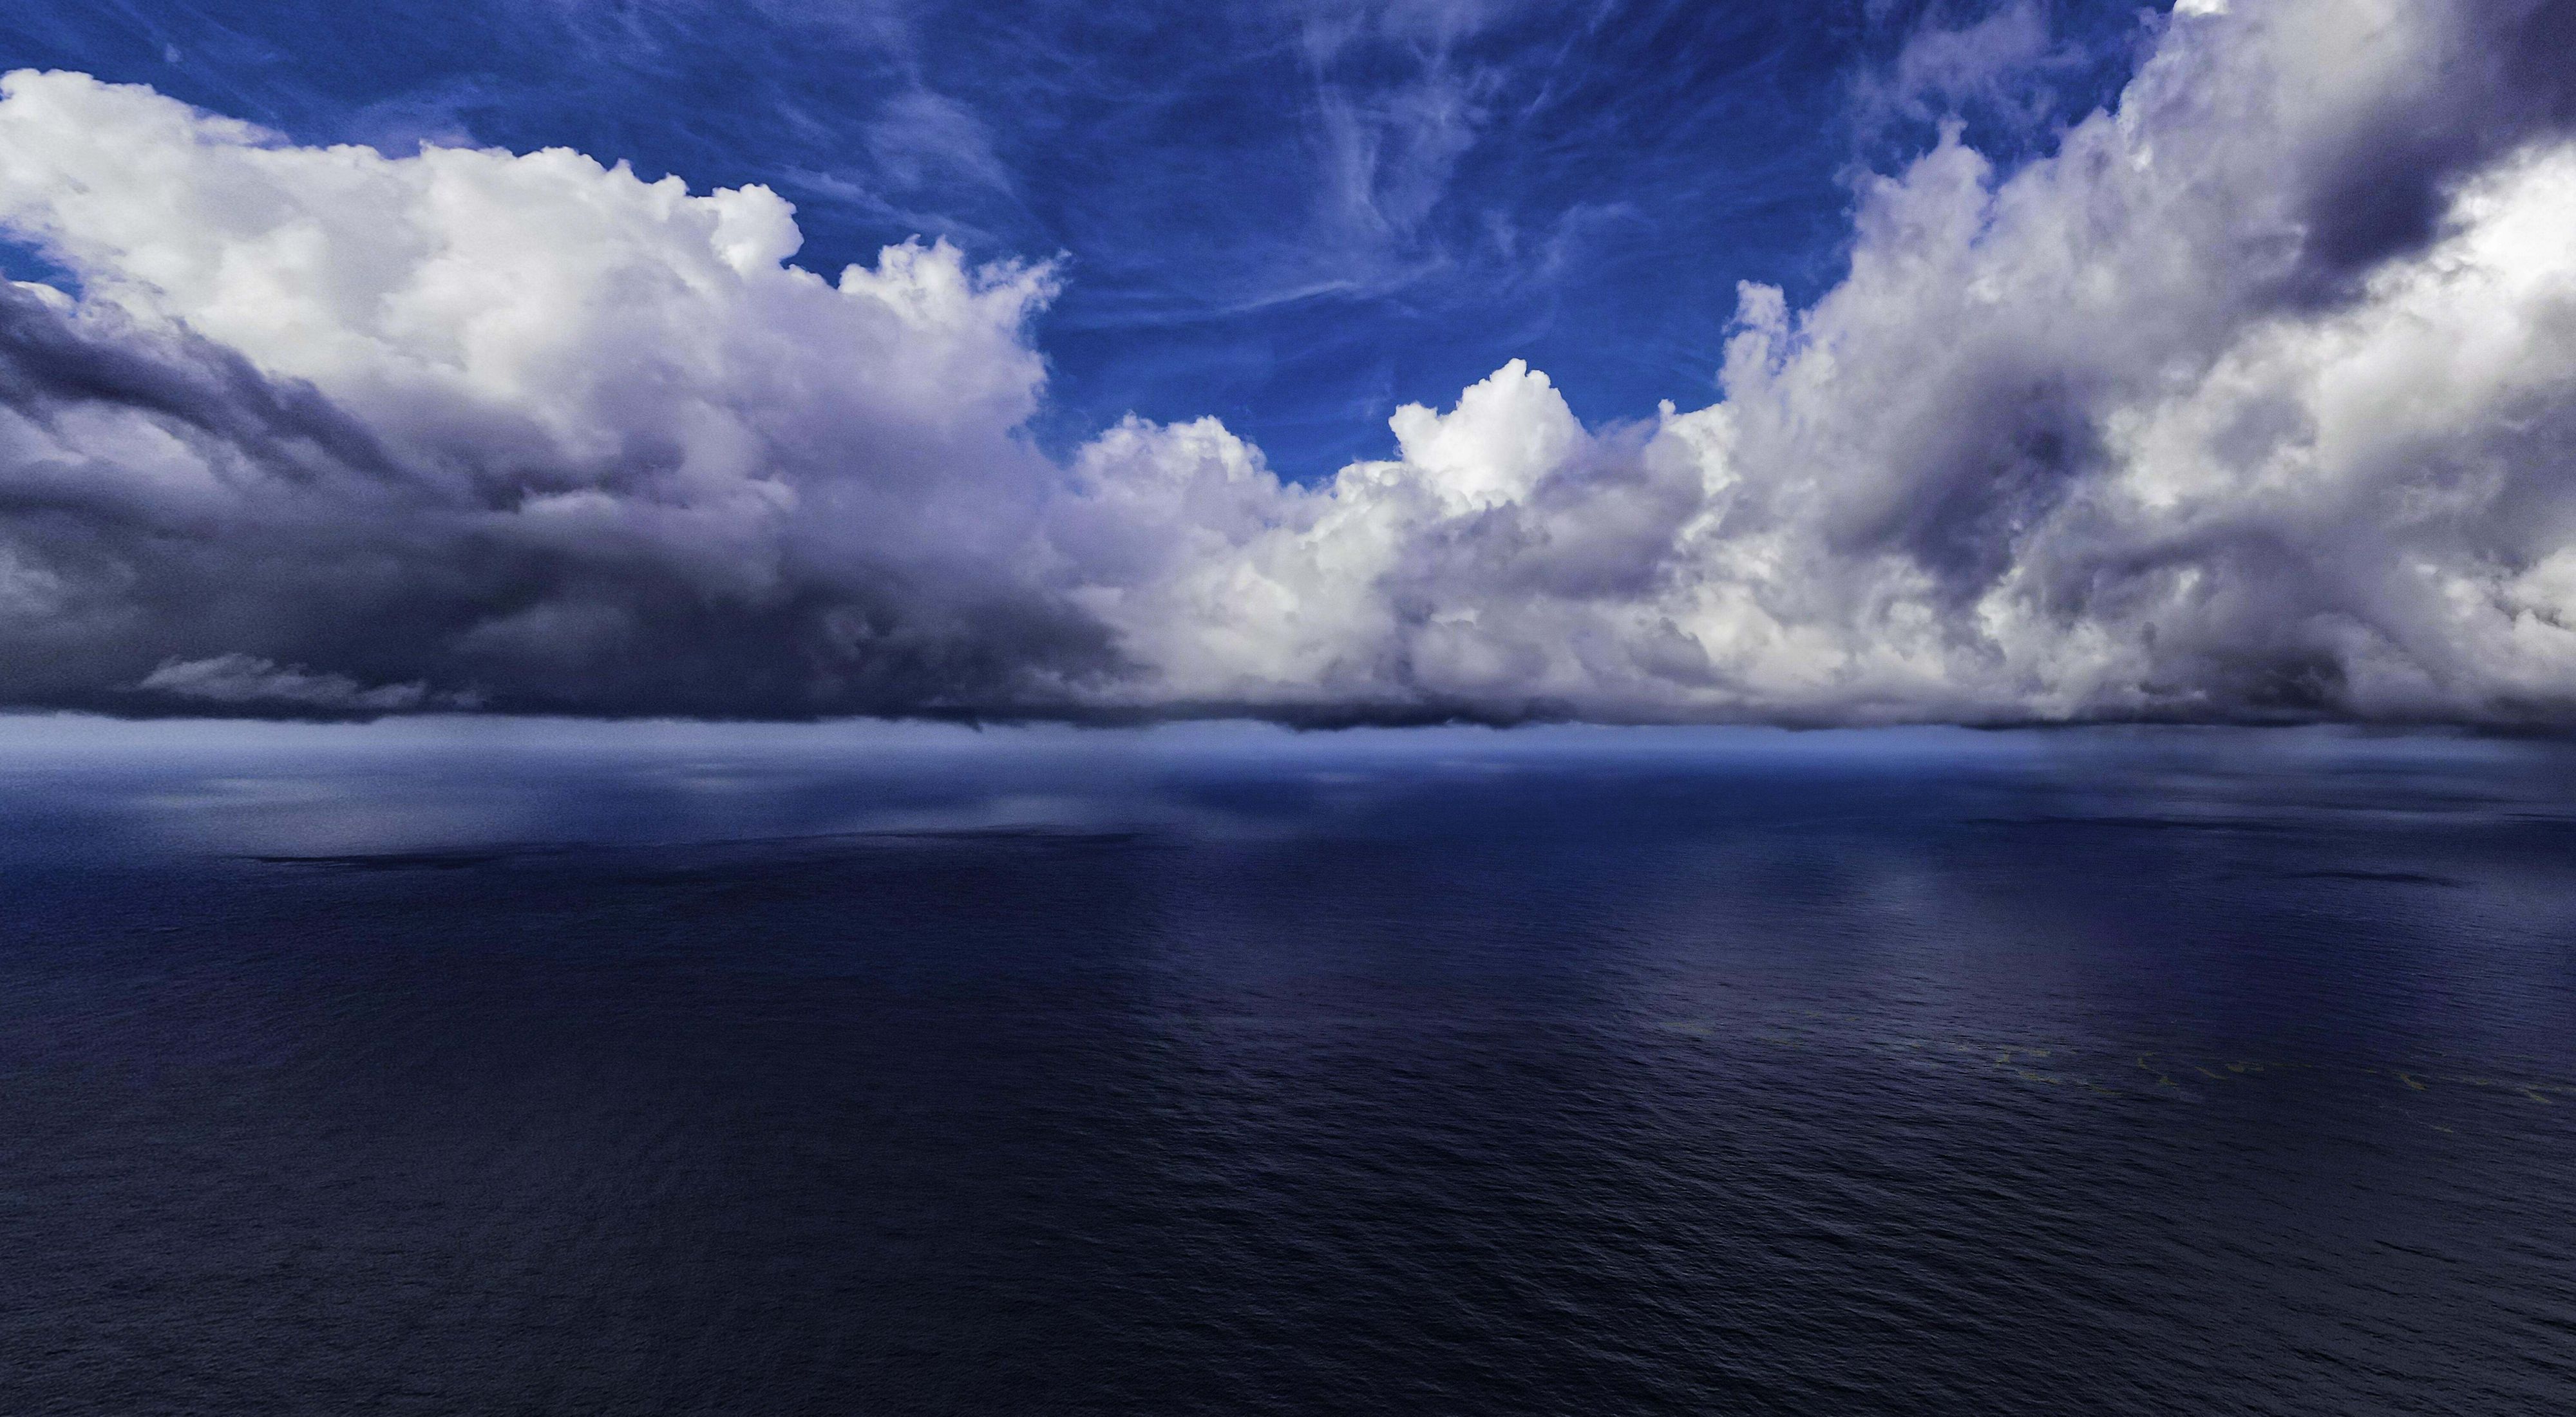 Ocean skyline with clouds.